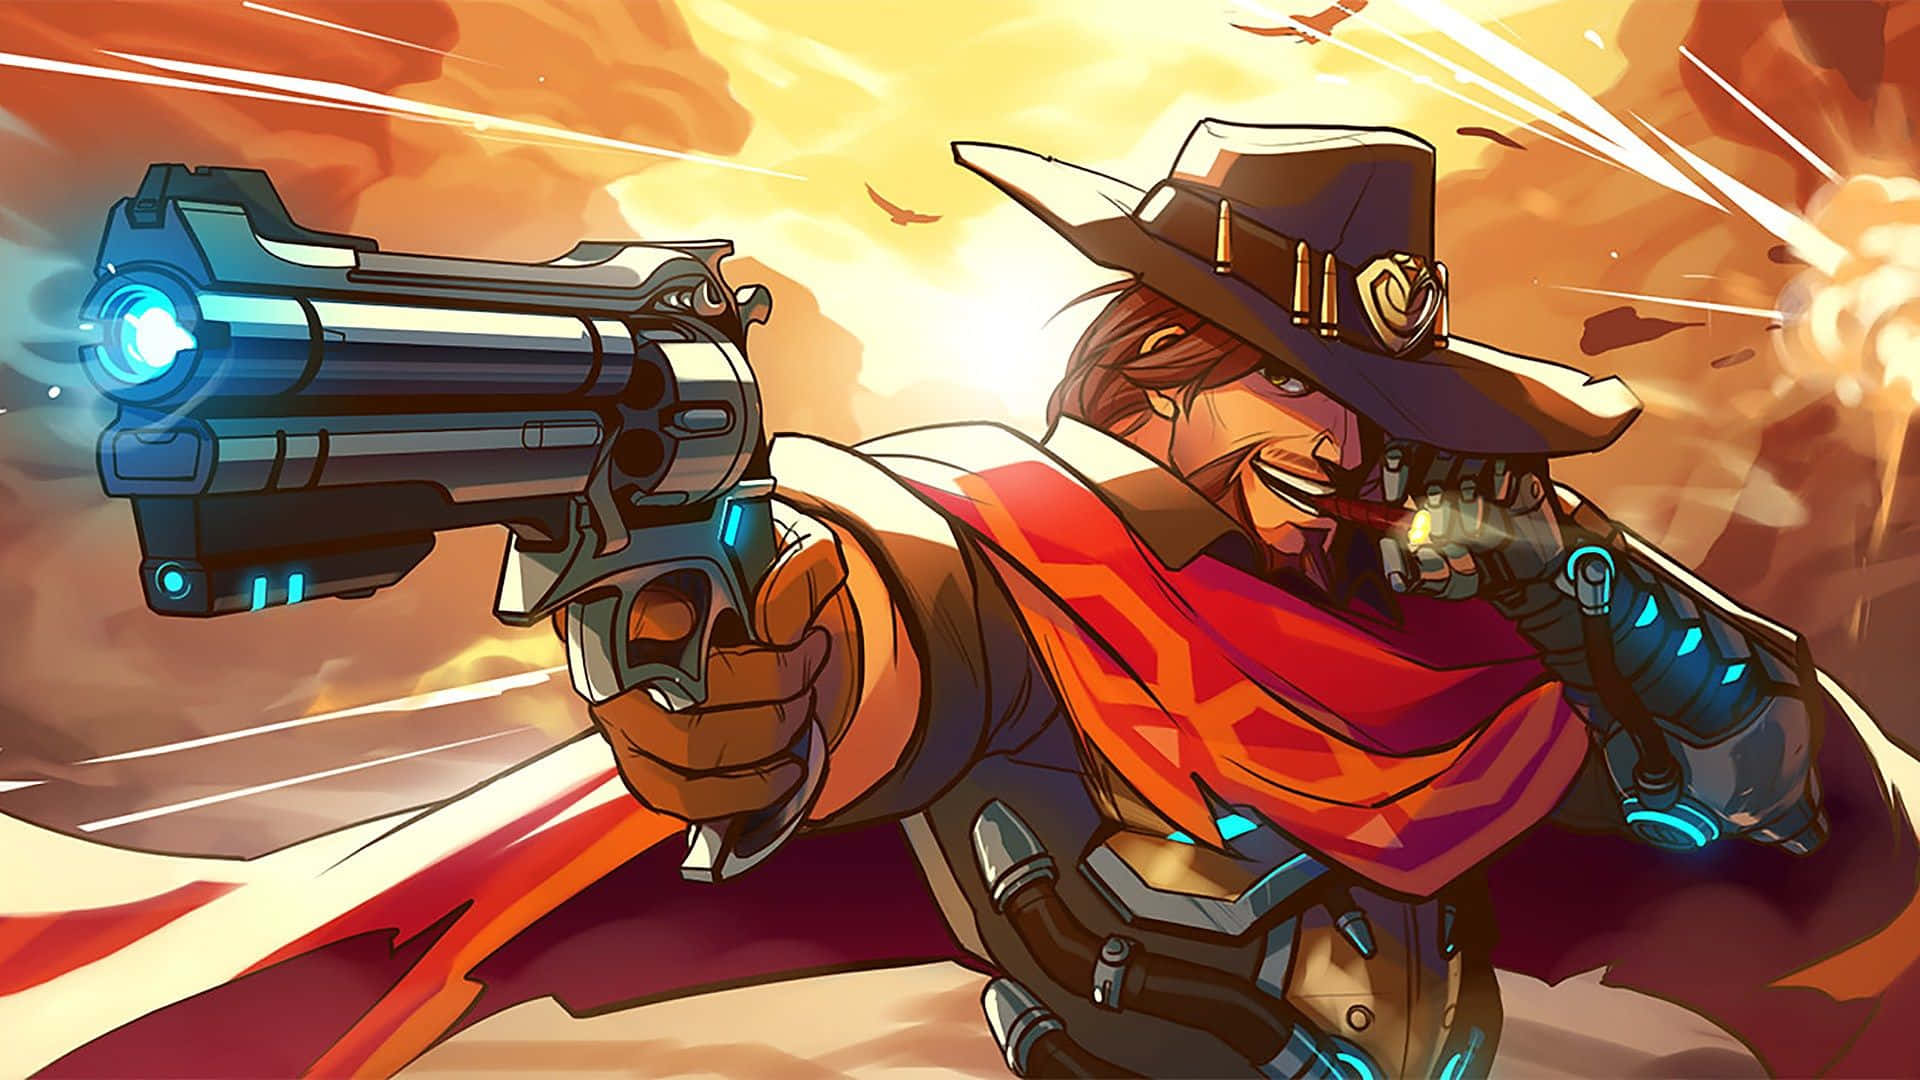 Mccree from Overwatch in Action Wallpaper